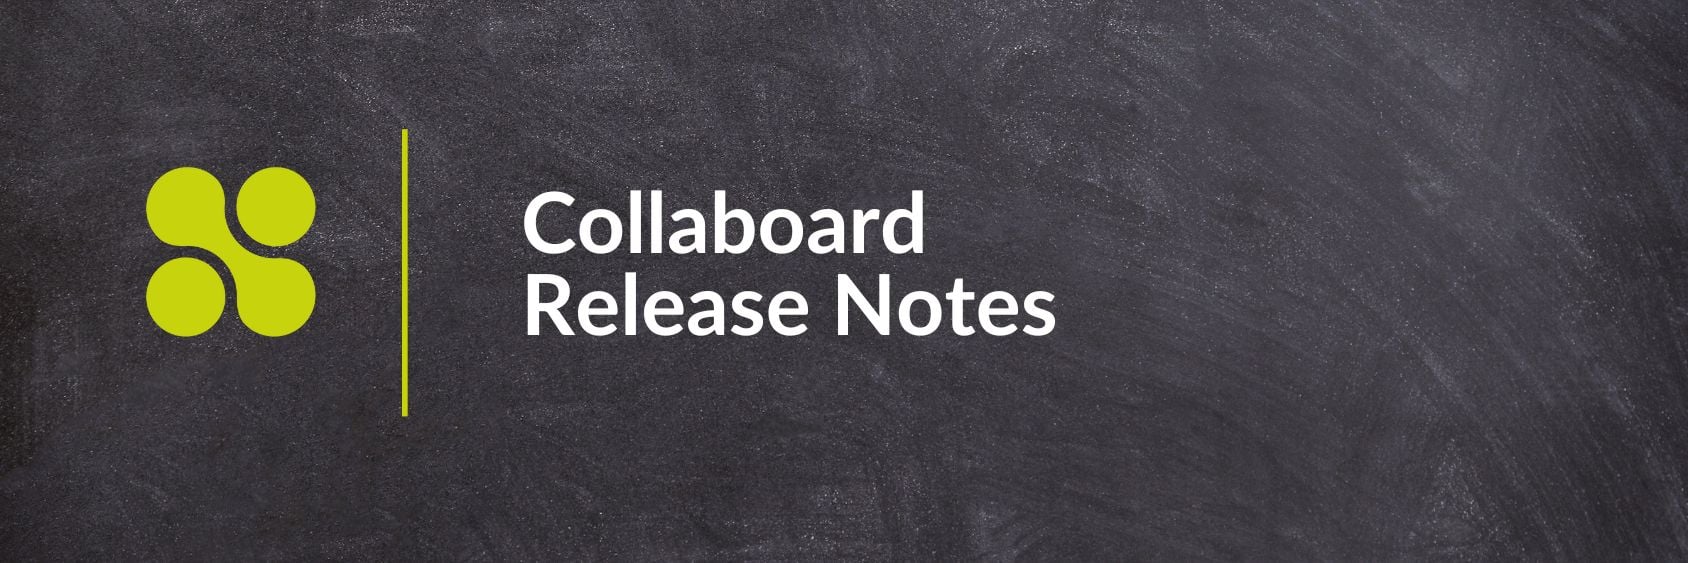 Collaboard_Release_Notes